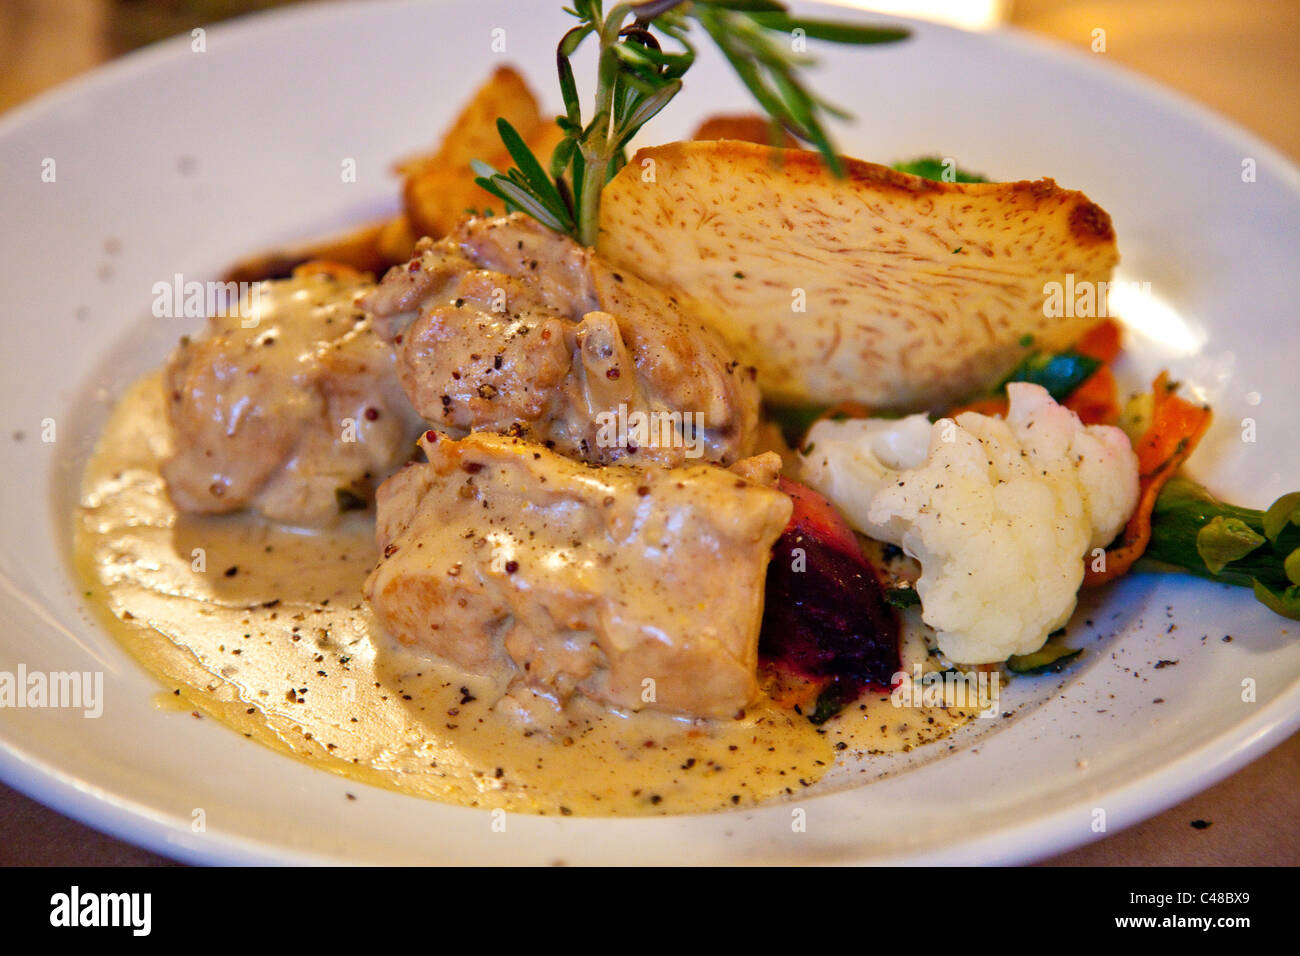 Two mustards rabbit at Le Lapin Saute restaurant in old town, Quebec City, Canada Stock Photo